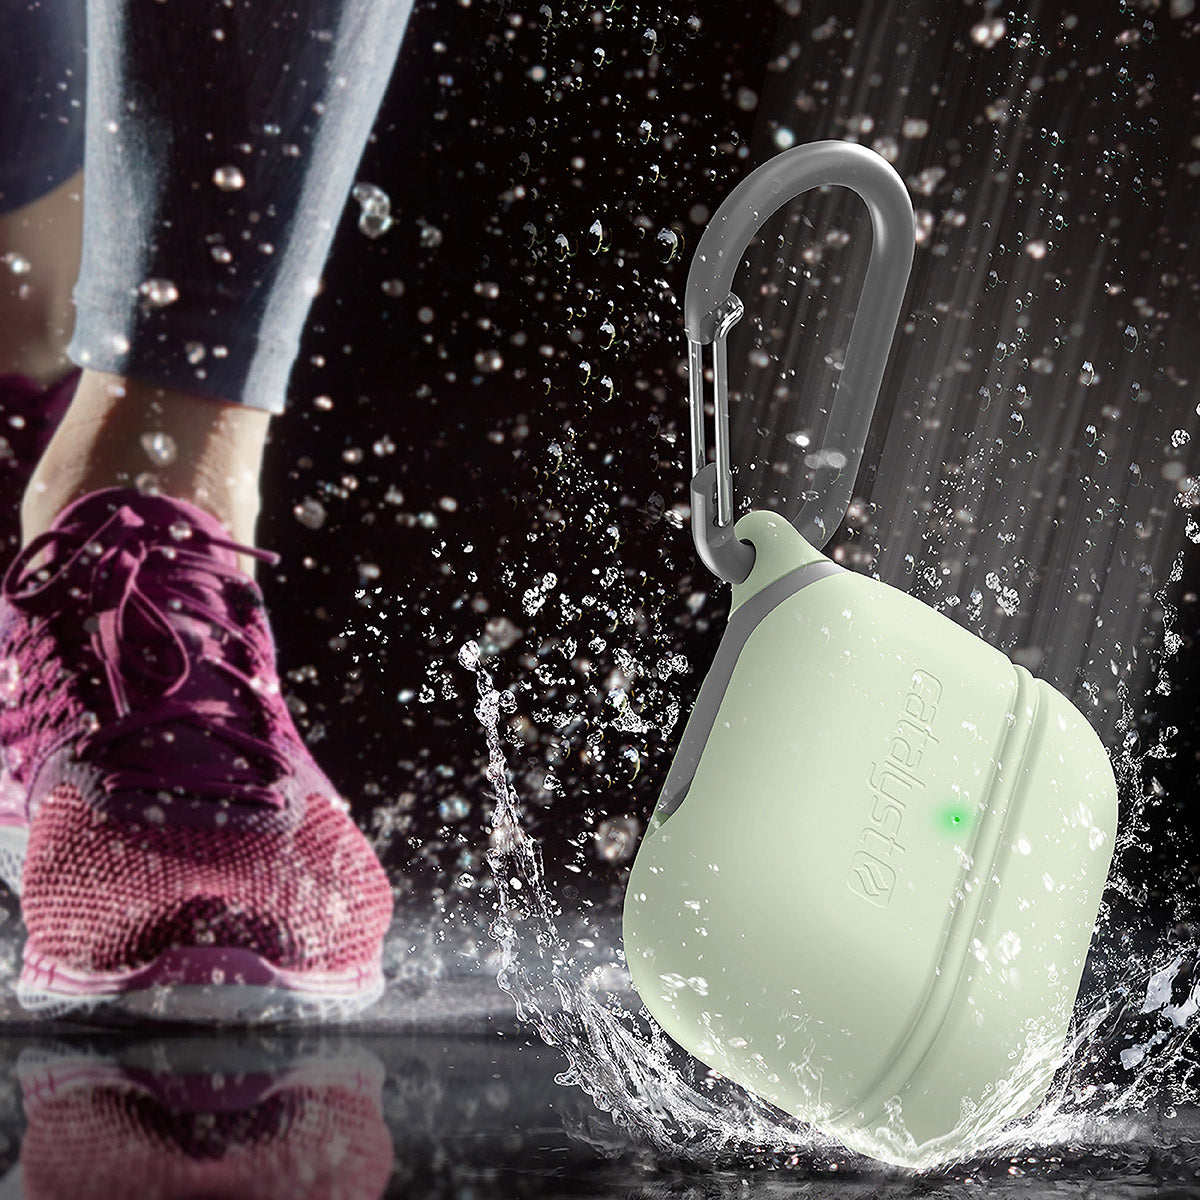 catalyst airpods pro gen 2 1 waterproof case carabiner special edition glow in the dark dropped and splashes of water running shoes